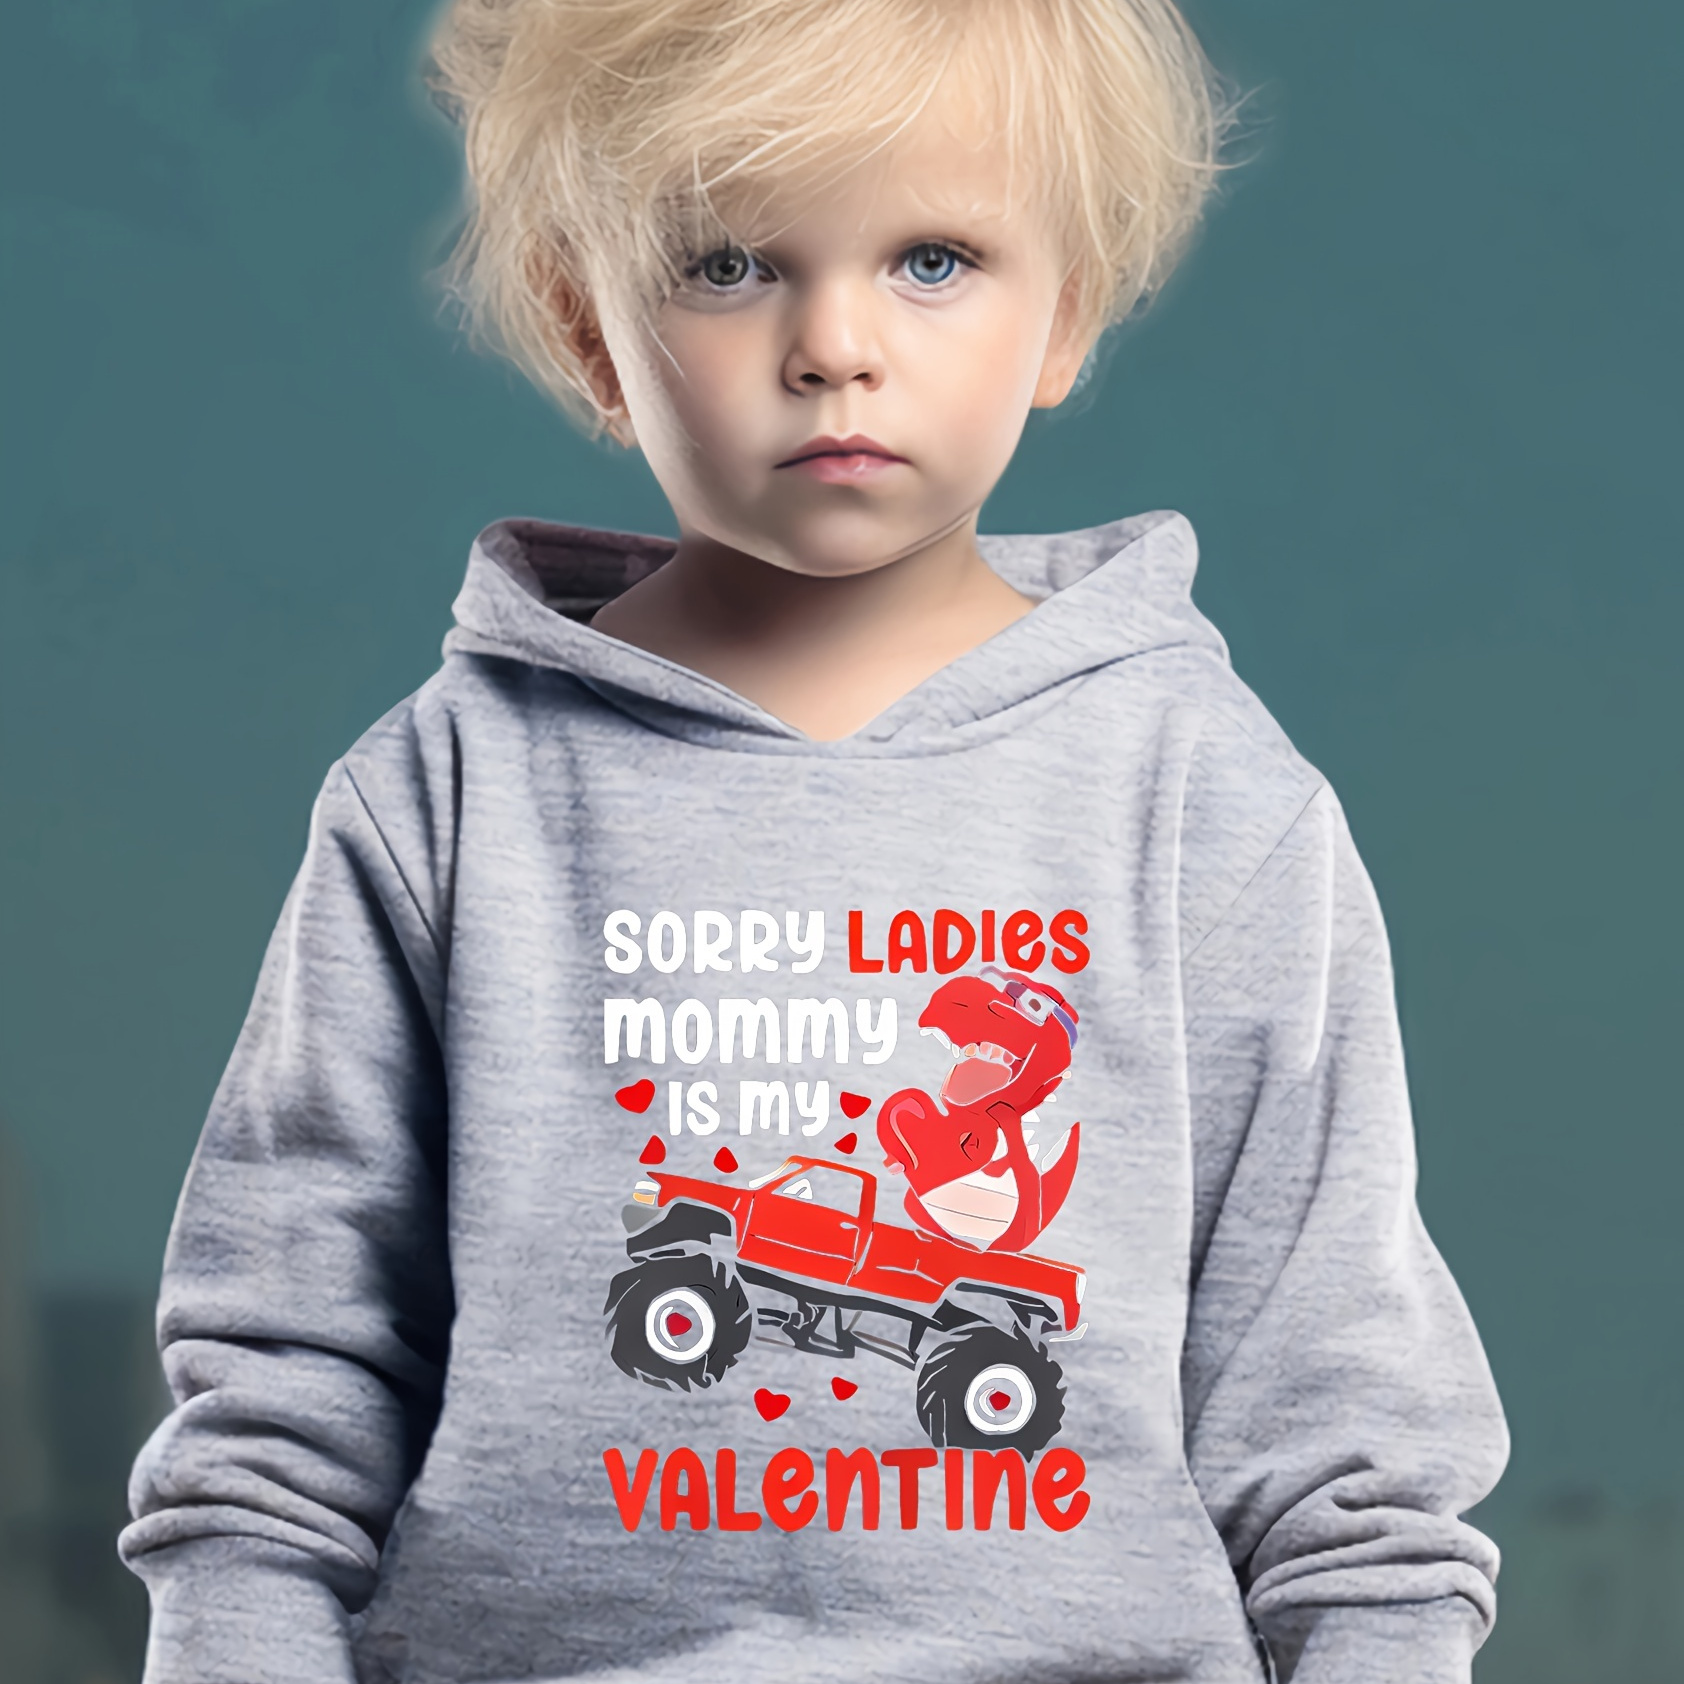 

2pcs Boy's Mommy Is My Valentine Print Hooded Outfit, Hoodie & Pants Set, Kid's Clothes For Spring Fall Winter, As Gift